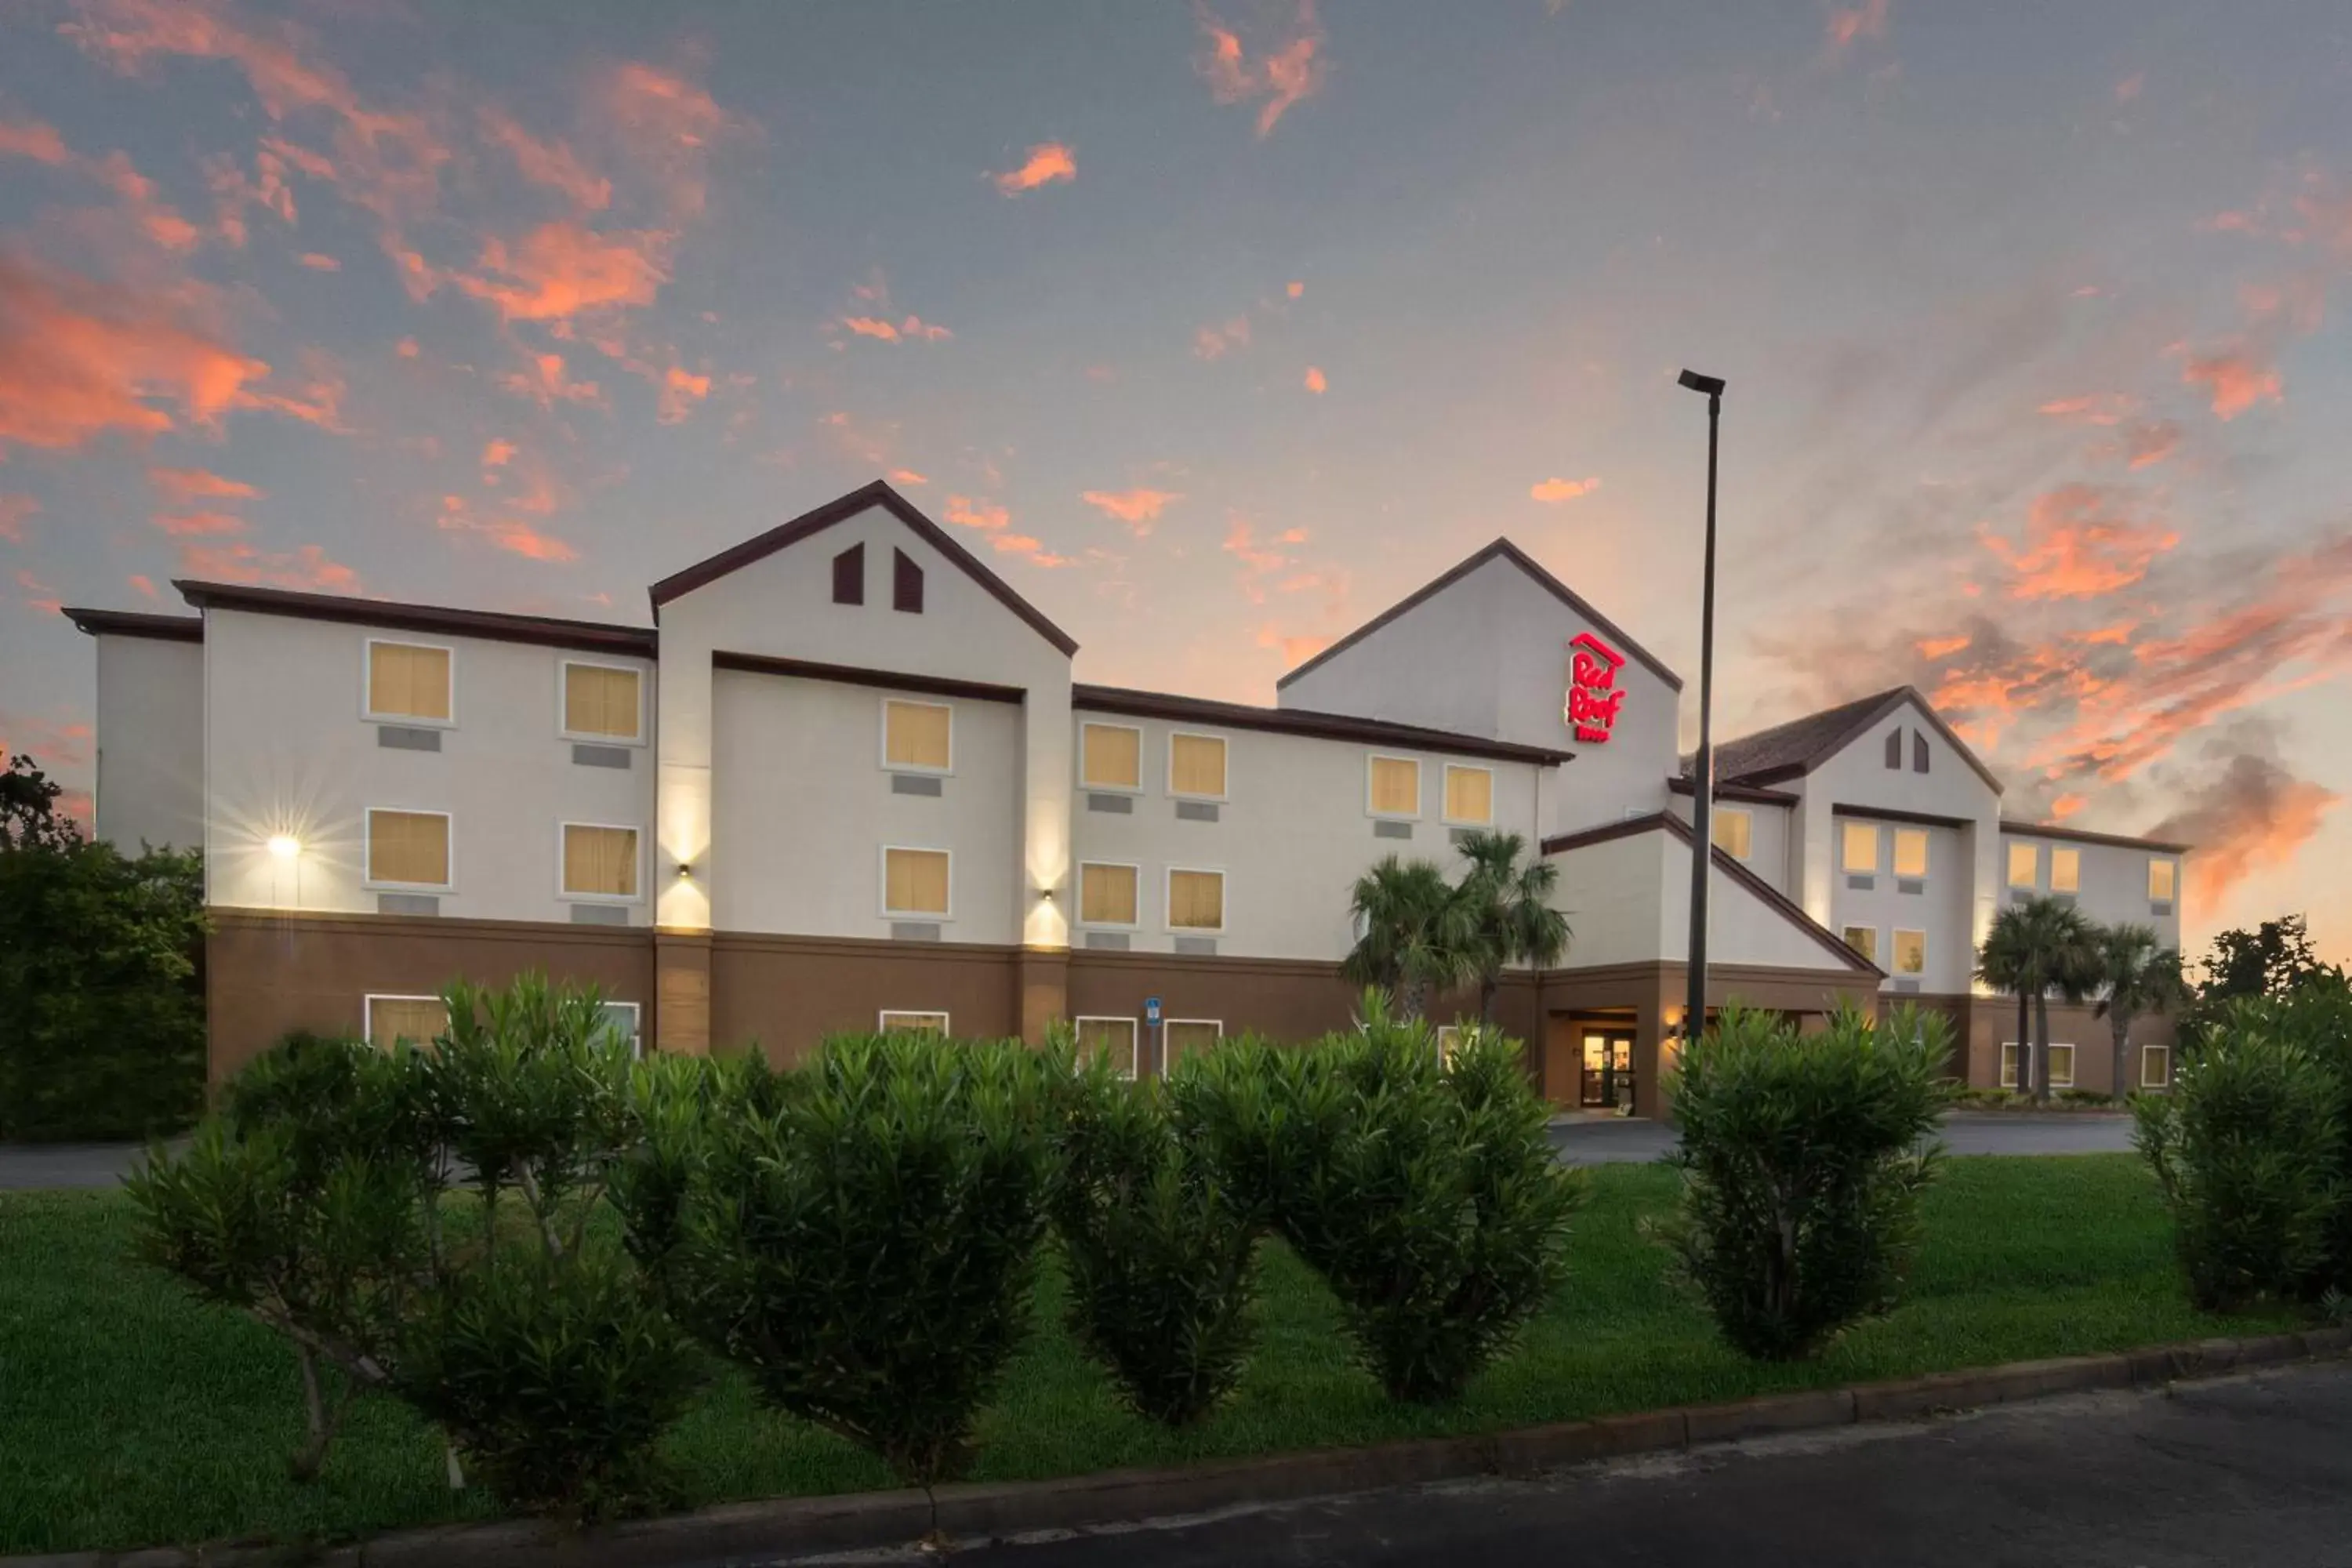 Property Building in Red Roof Inn Panama City